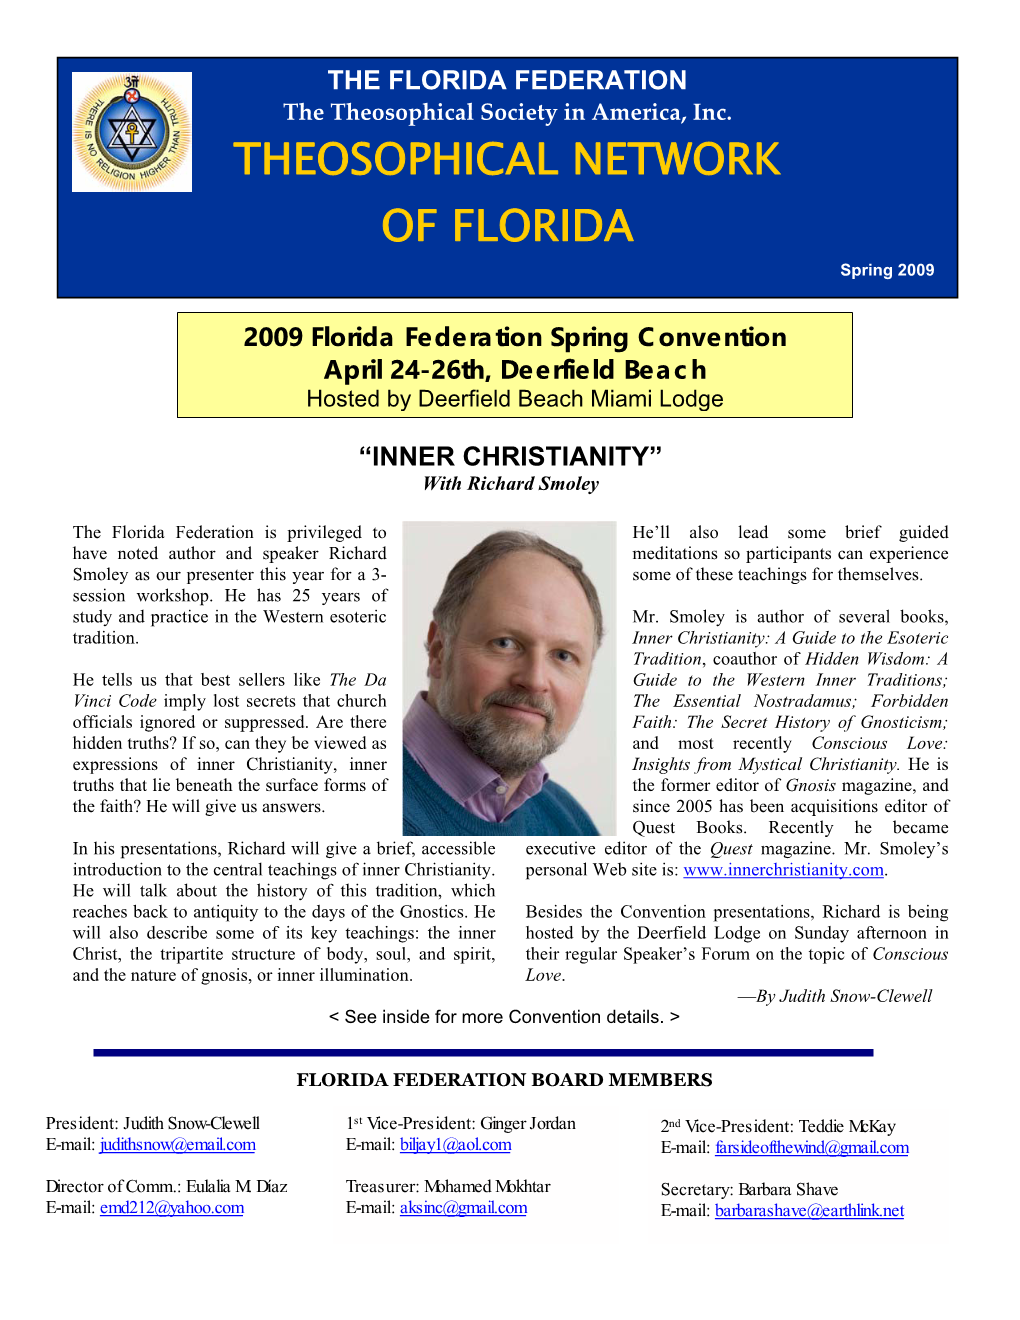 THEOSOPHICAL NETWORK of FLORIDA Spring 2009